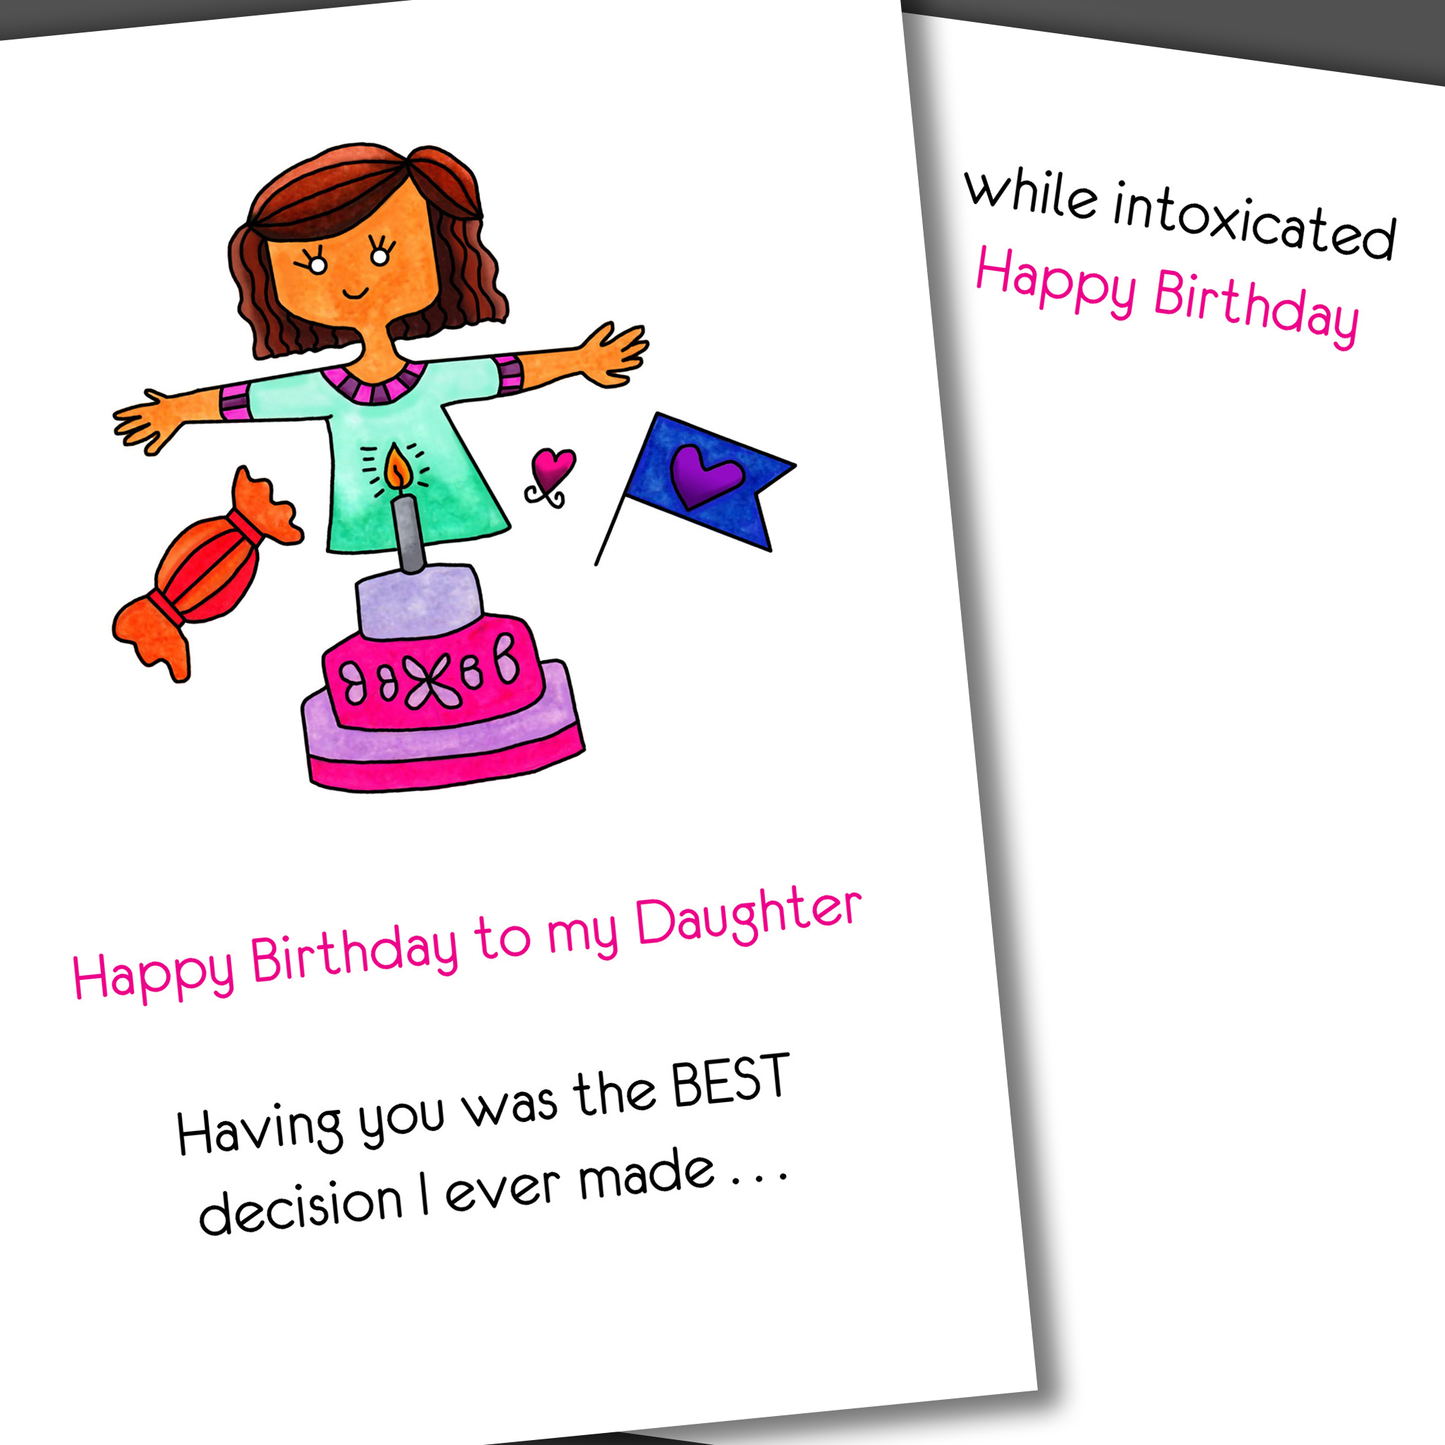 Funny happy birthday card for a daughter with a drawing of a girl and a cake on the front of the card. Inside the card is a funny joke that ends in you are the best decision I ever made while intoxicated.